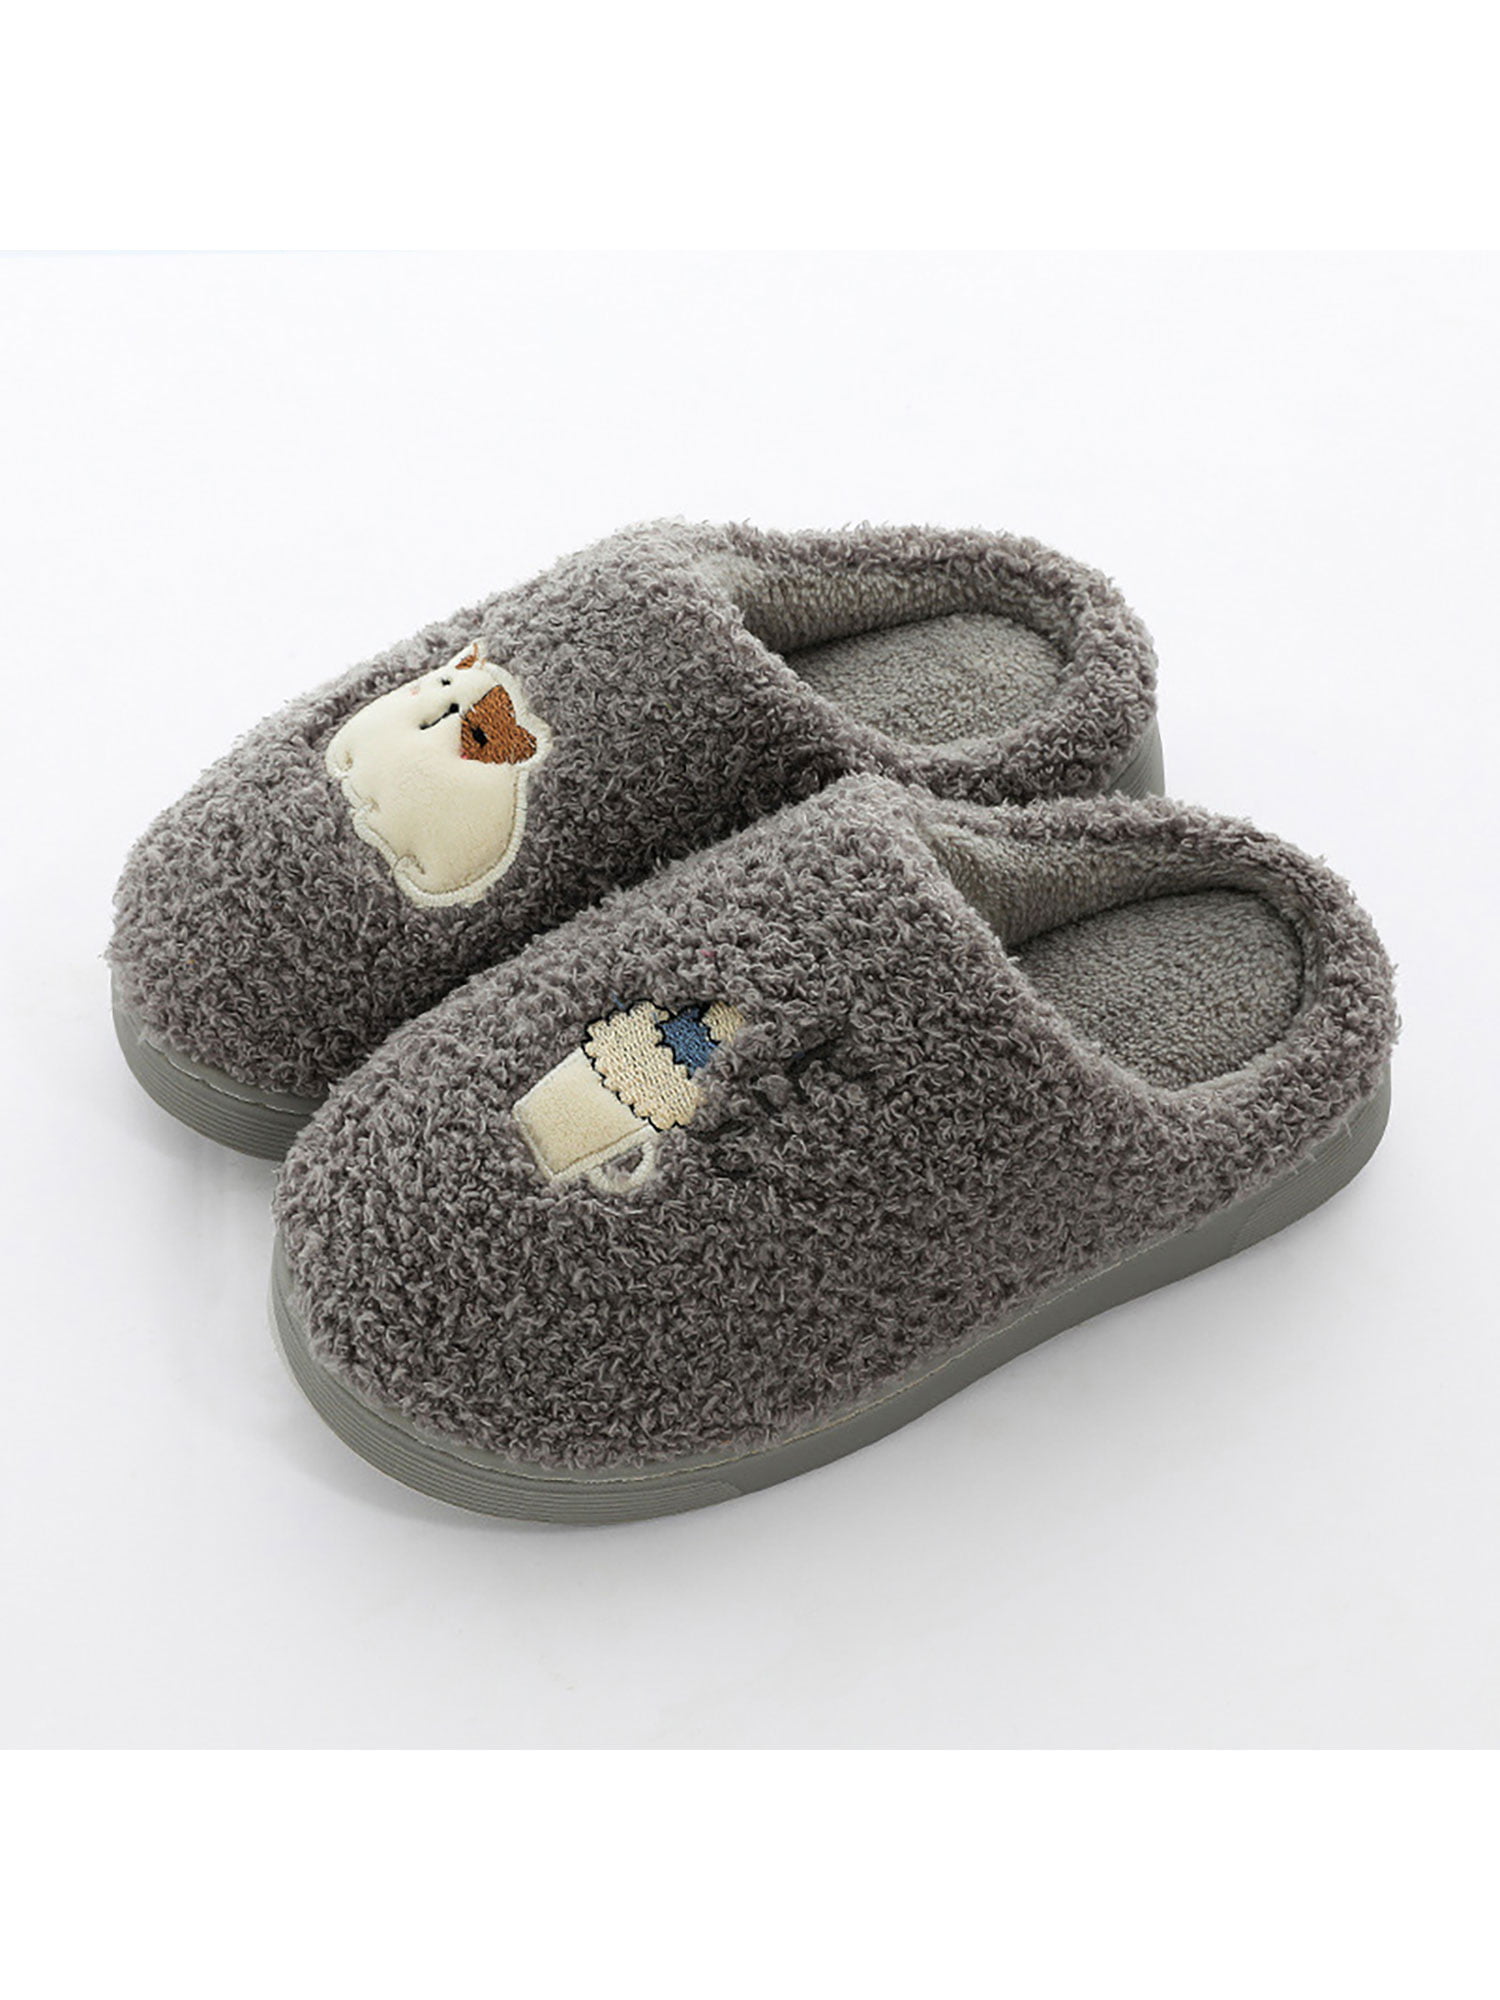 Monkys Baby Boys Girls Shoes Slippers Anti-Slip Warm Shoes Socks Cotton Shoes for Winter Home 